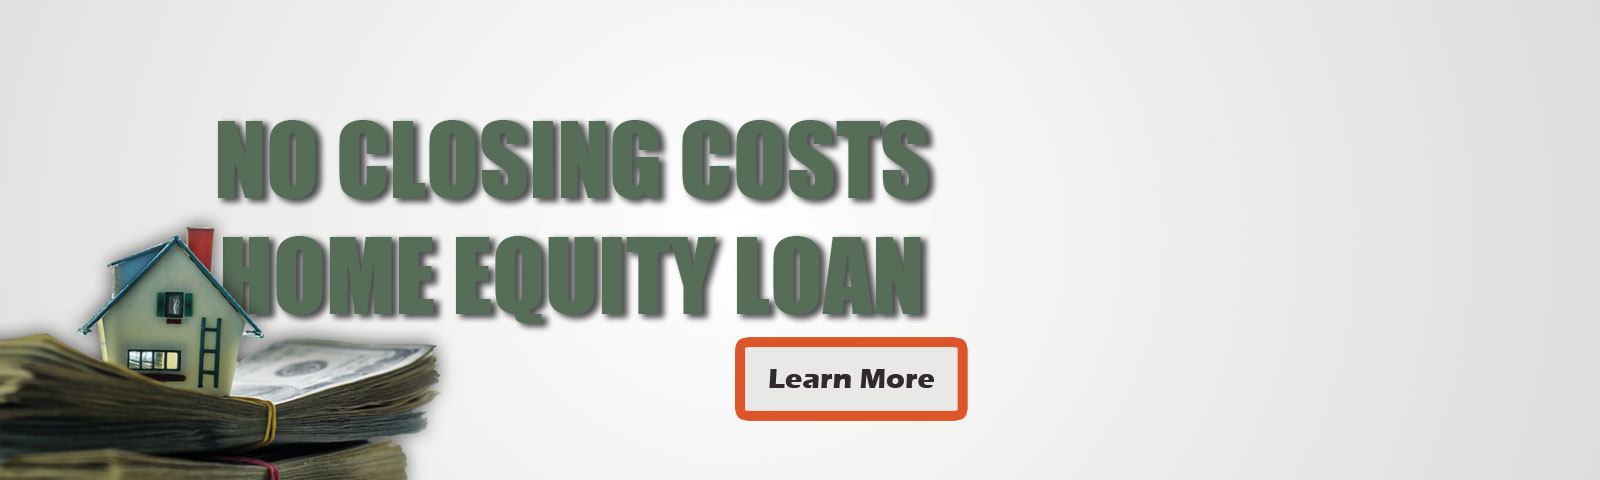 No closing costs home equity loan. Learn more.